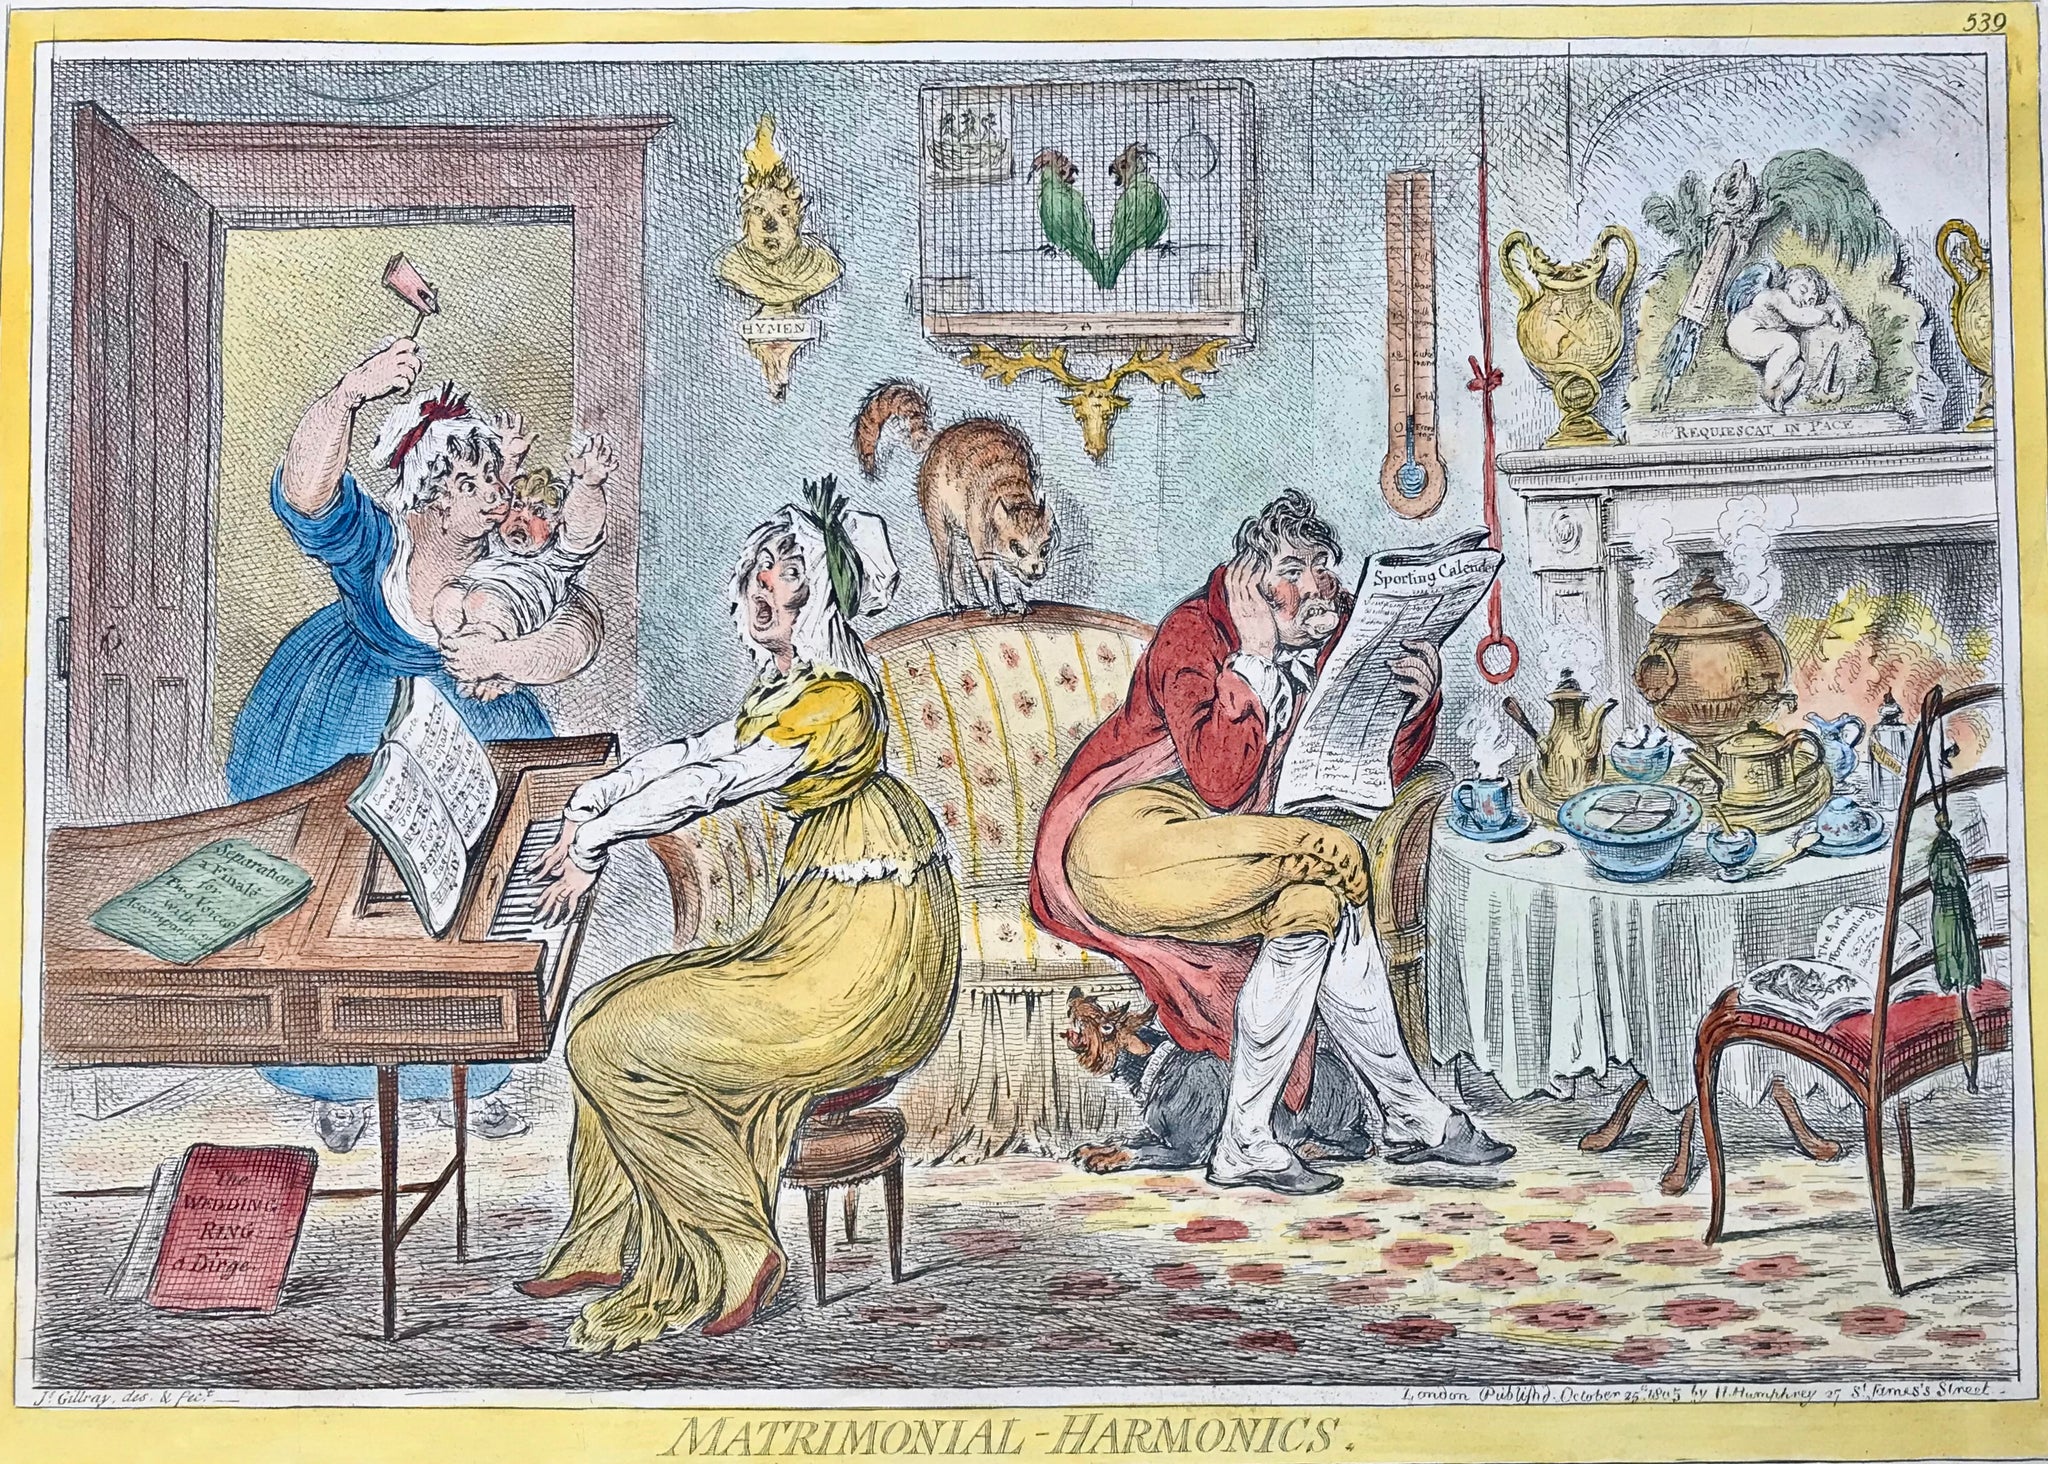 "Matrimonial-Harmonics"  Hand-colored copper etching by James Gilray (1756-1815)  The two love birds of yesteryear have entered the stage of "normality" in their matrimonial togetherness. The lady plays dissonant accords on the piano, the husband endulges in the study of a newspaper and holds his ear shut as the maid brings in the screaming baby. Their pre-matrimonial harmony has vanished. Even the cat humps and the parrots quarrel as the shrill and poisoned atmosphere in this advanced matrimonial scene pre